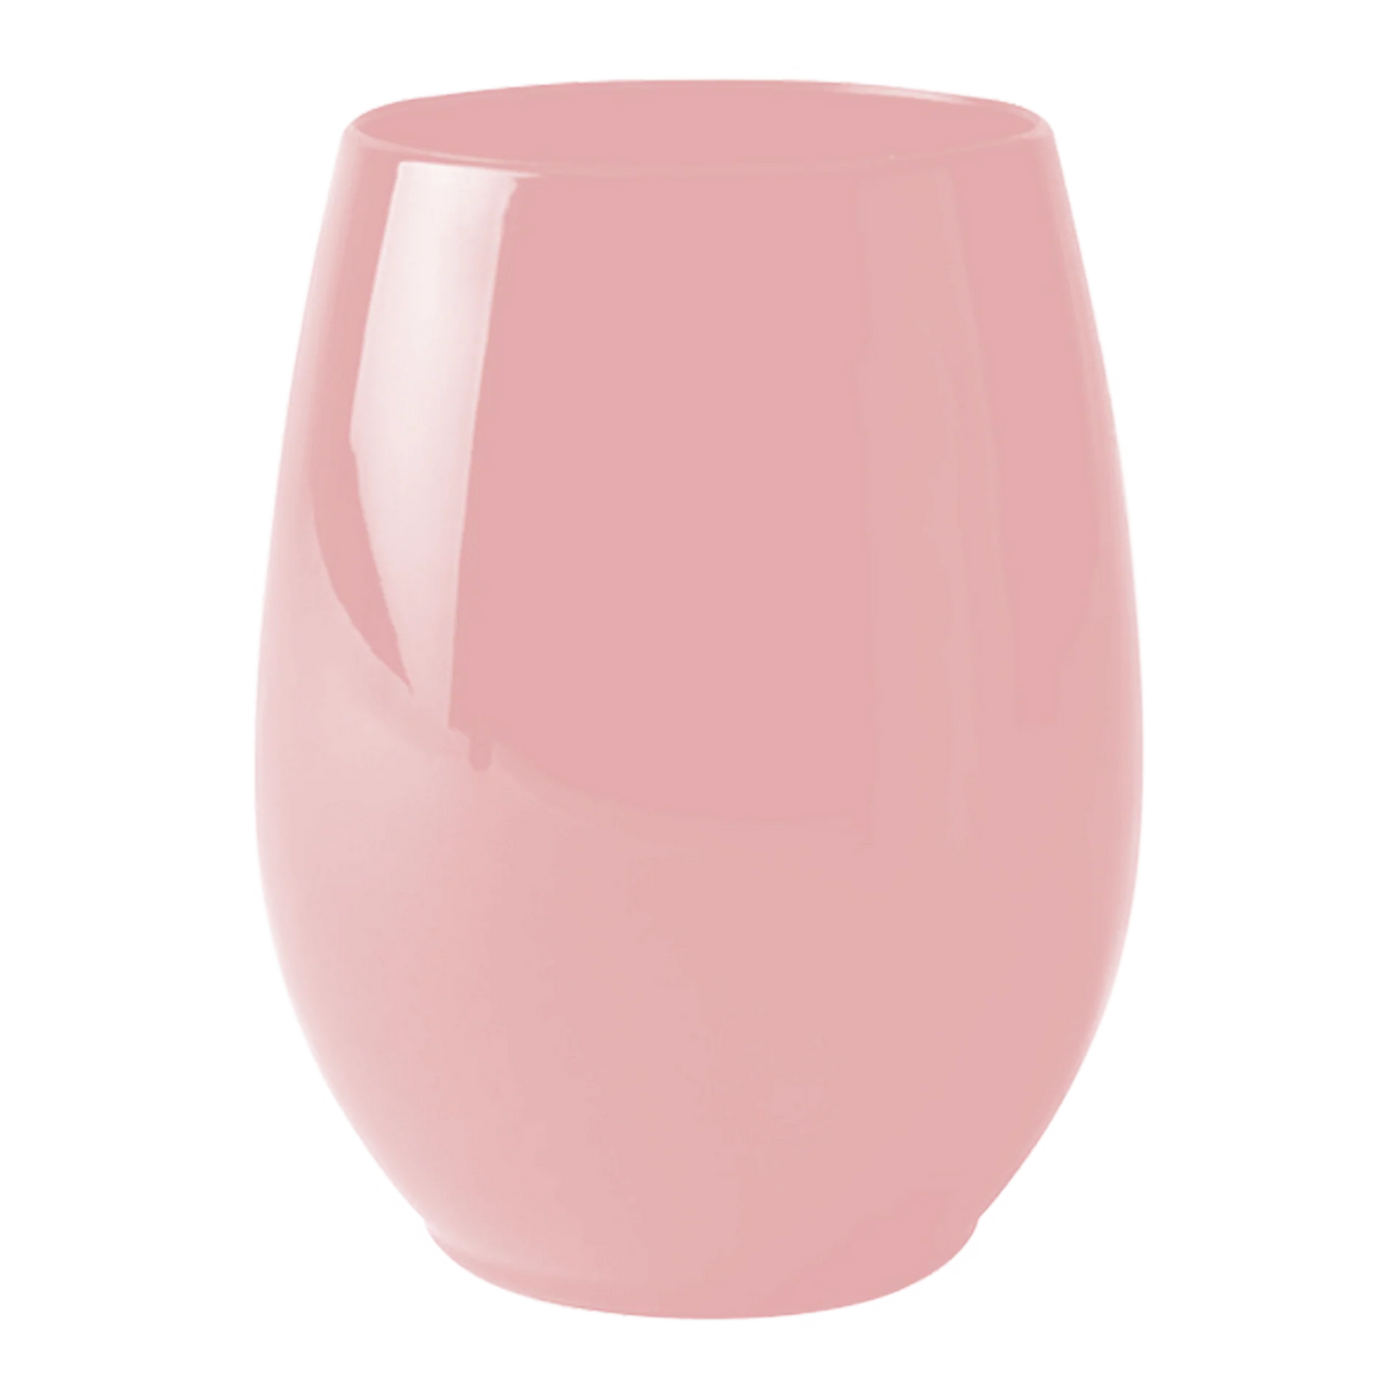 12 oz. Solid Pink Elegant Stemless Disposable Plastic Wine Glasses (16ct) - Set With Style